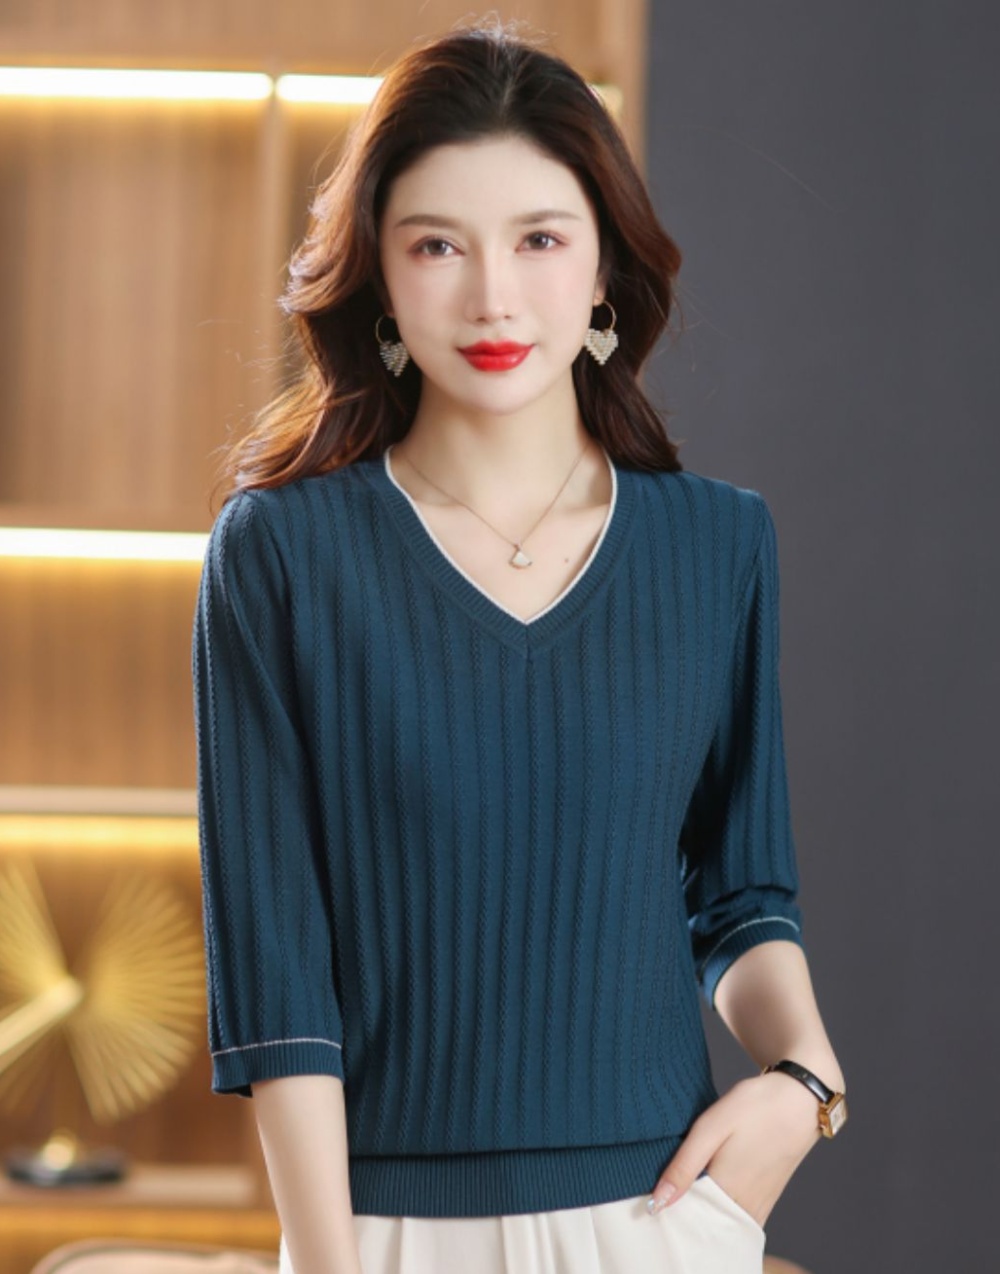 Loose Western style sweater thin T-shirt for women